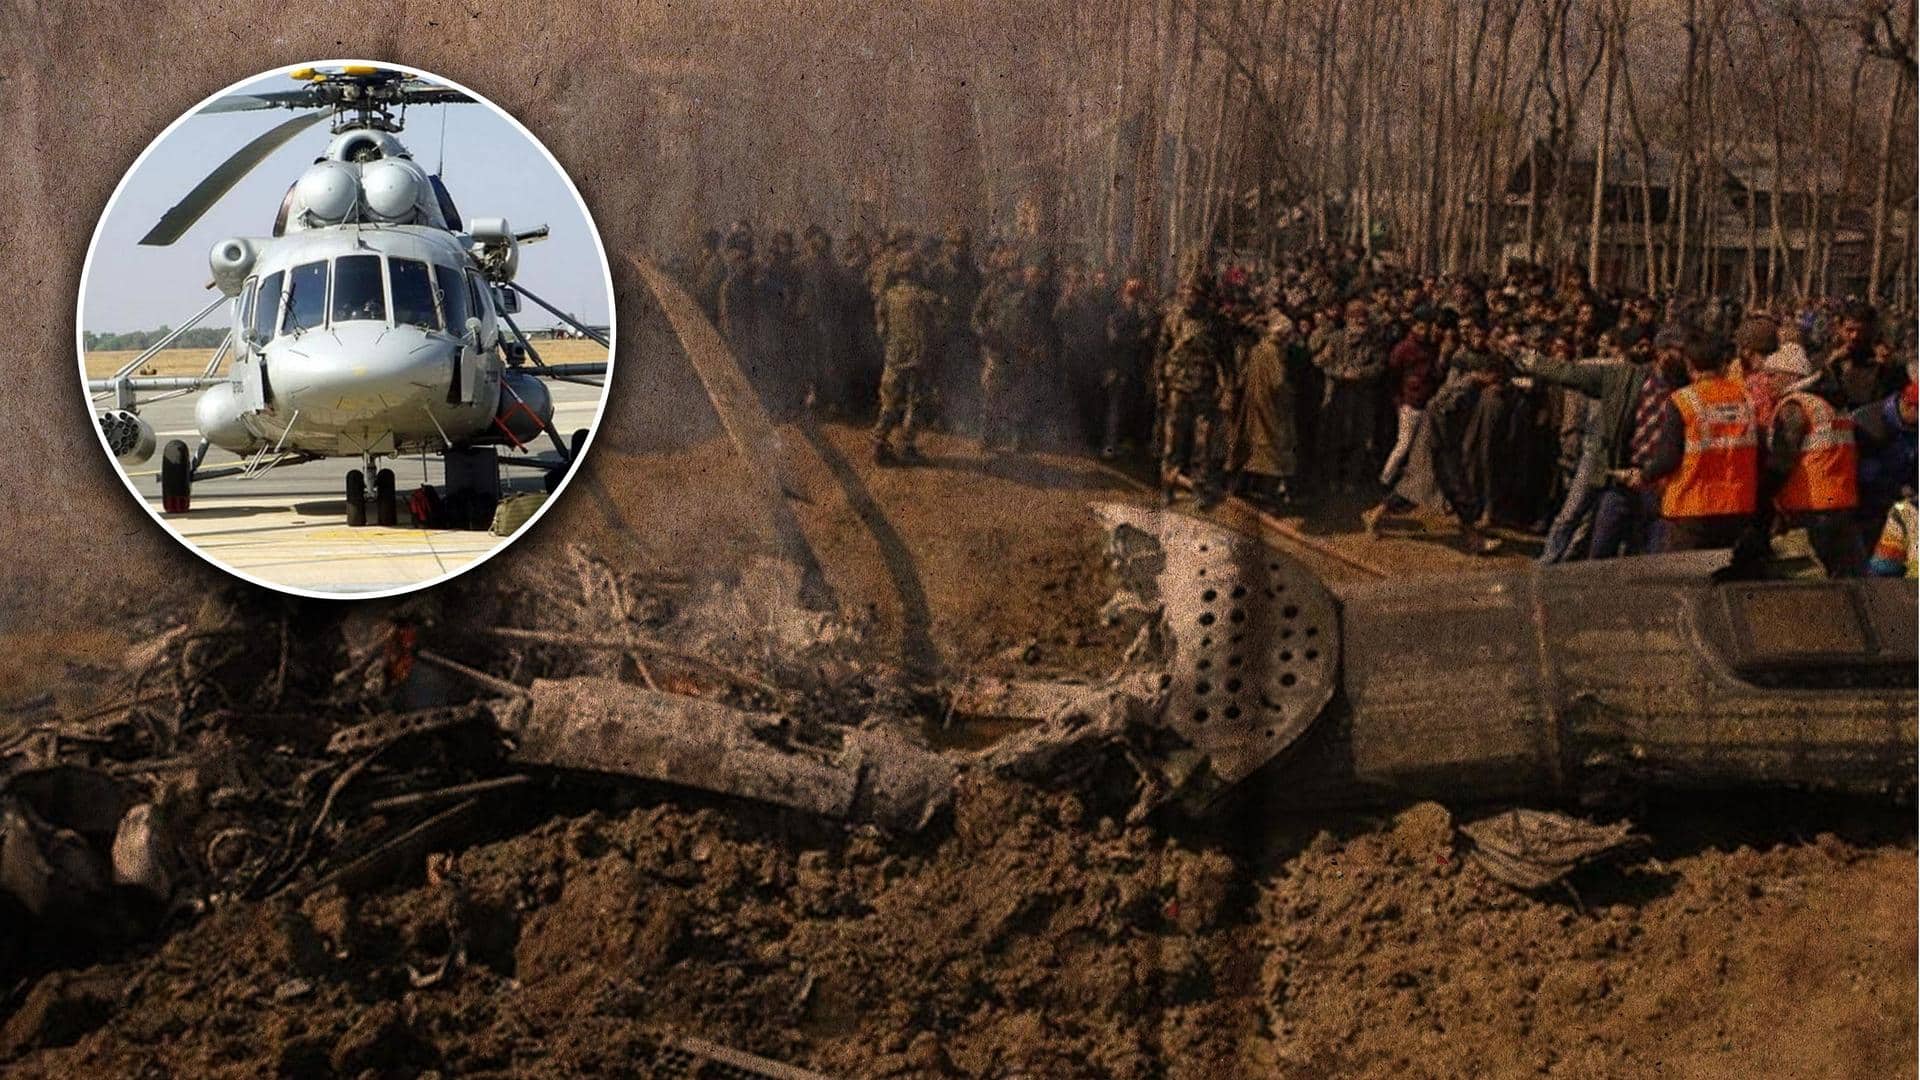 #NewsBytesExplainer: Why IAF officer was dismissed over 'friendly fire' accident